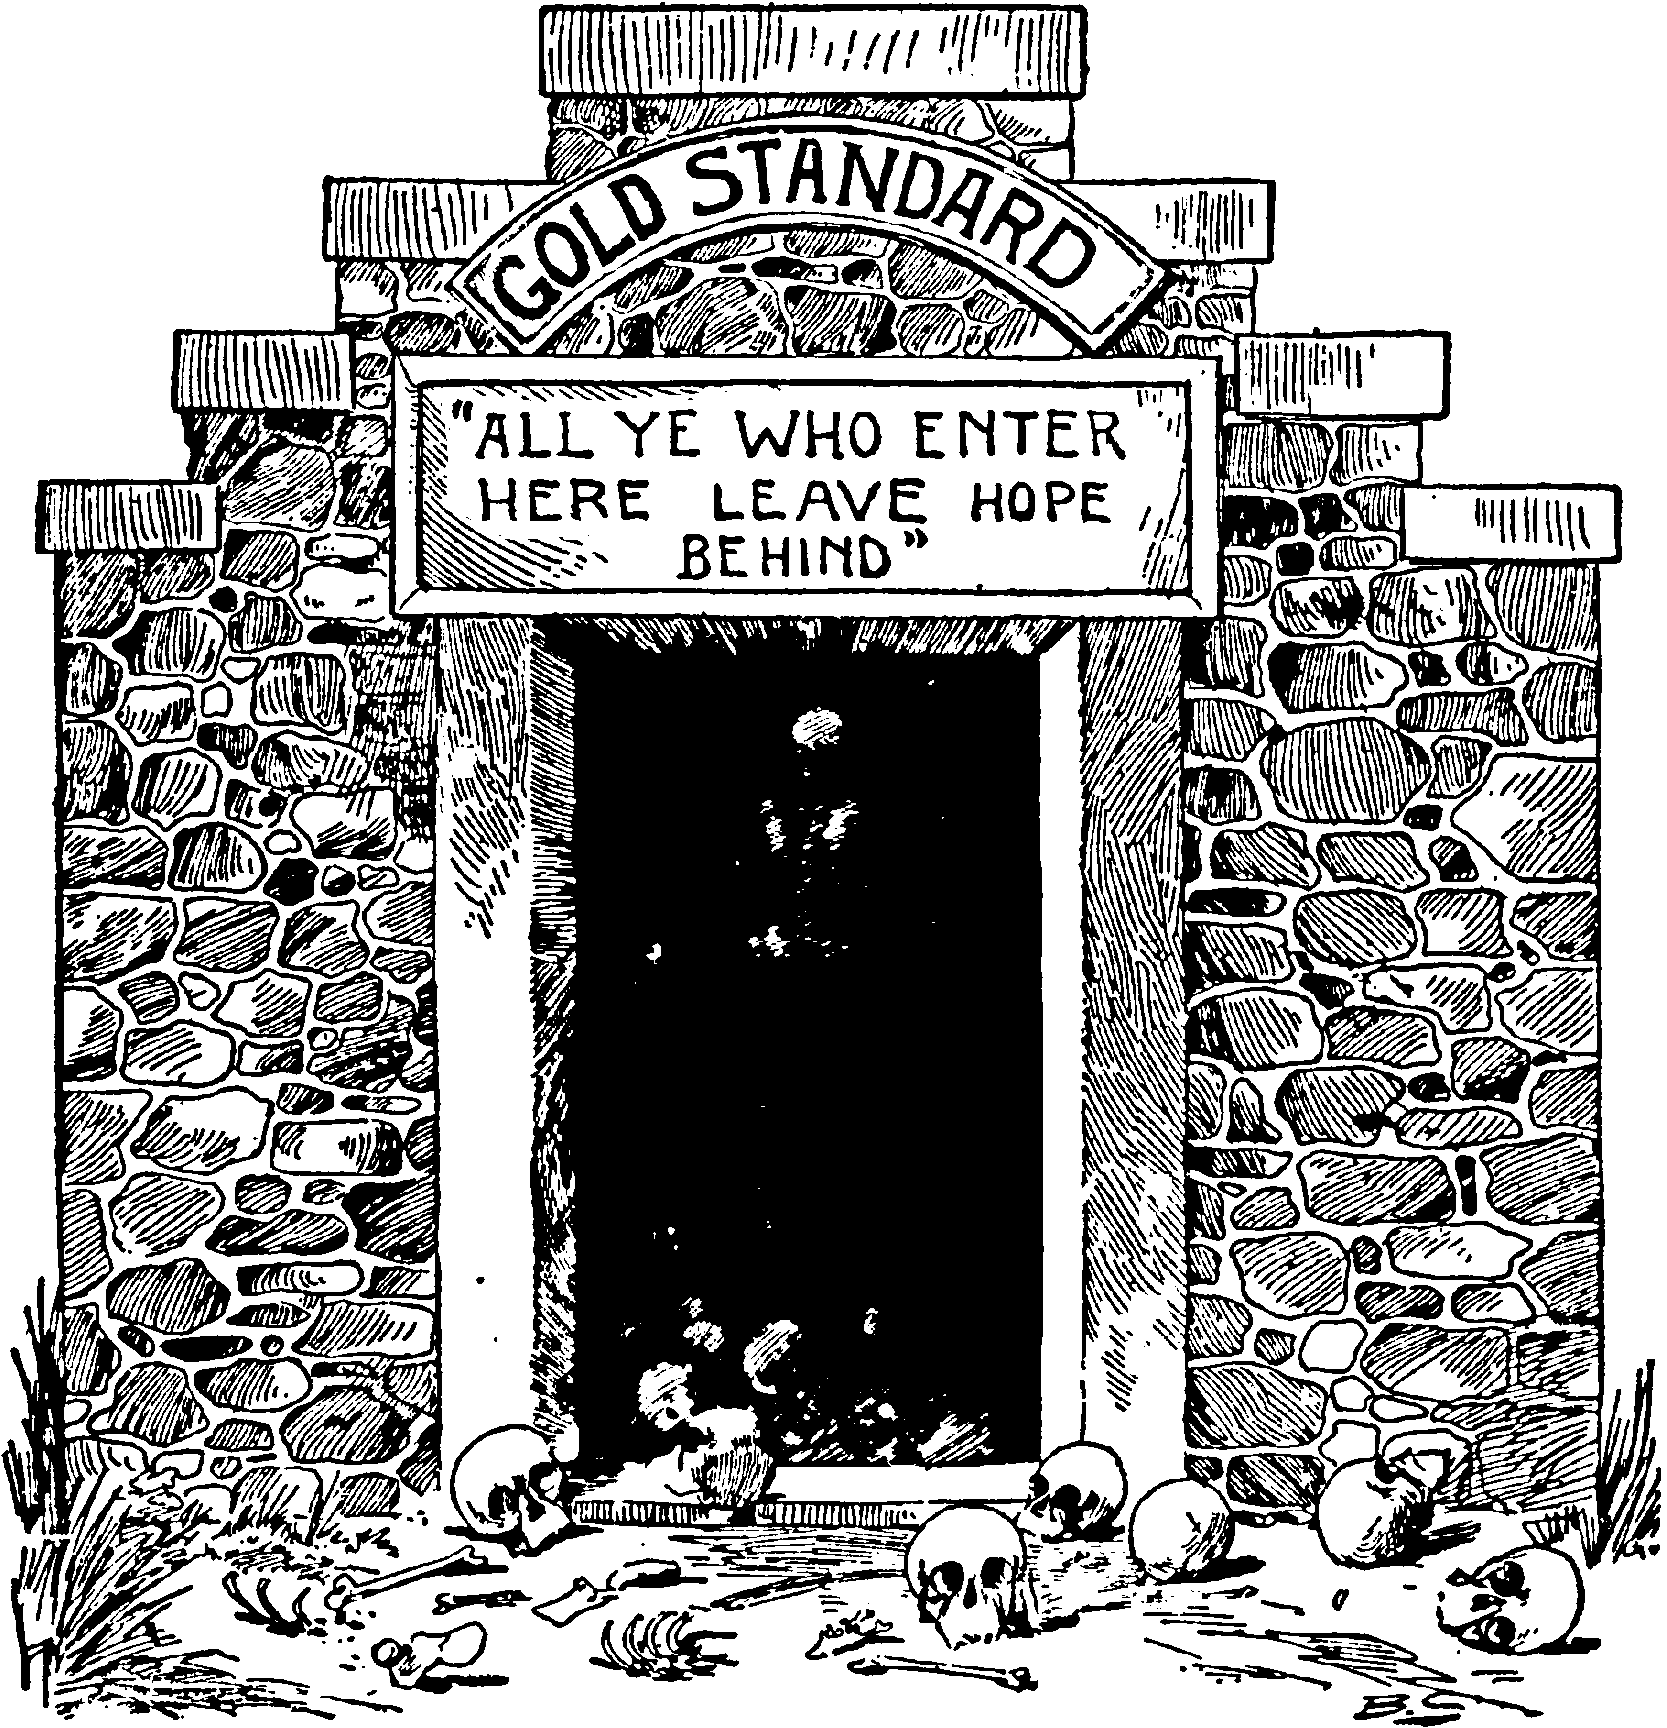 Gold Standard. All who enter here leave hope behind. Coin’s Financial School by WD Harvey 1894. Reformated for digital by Andy Chalkley in 2017.